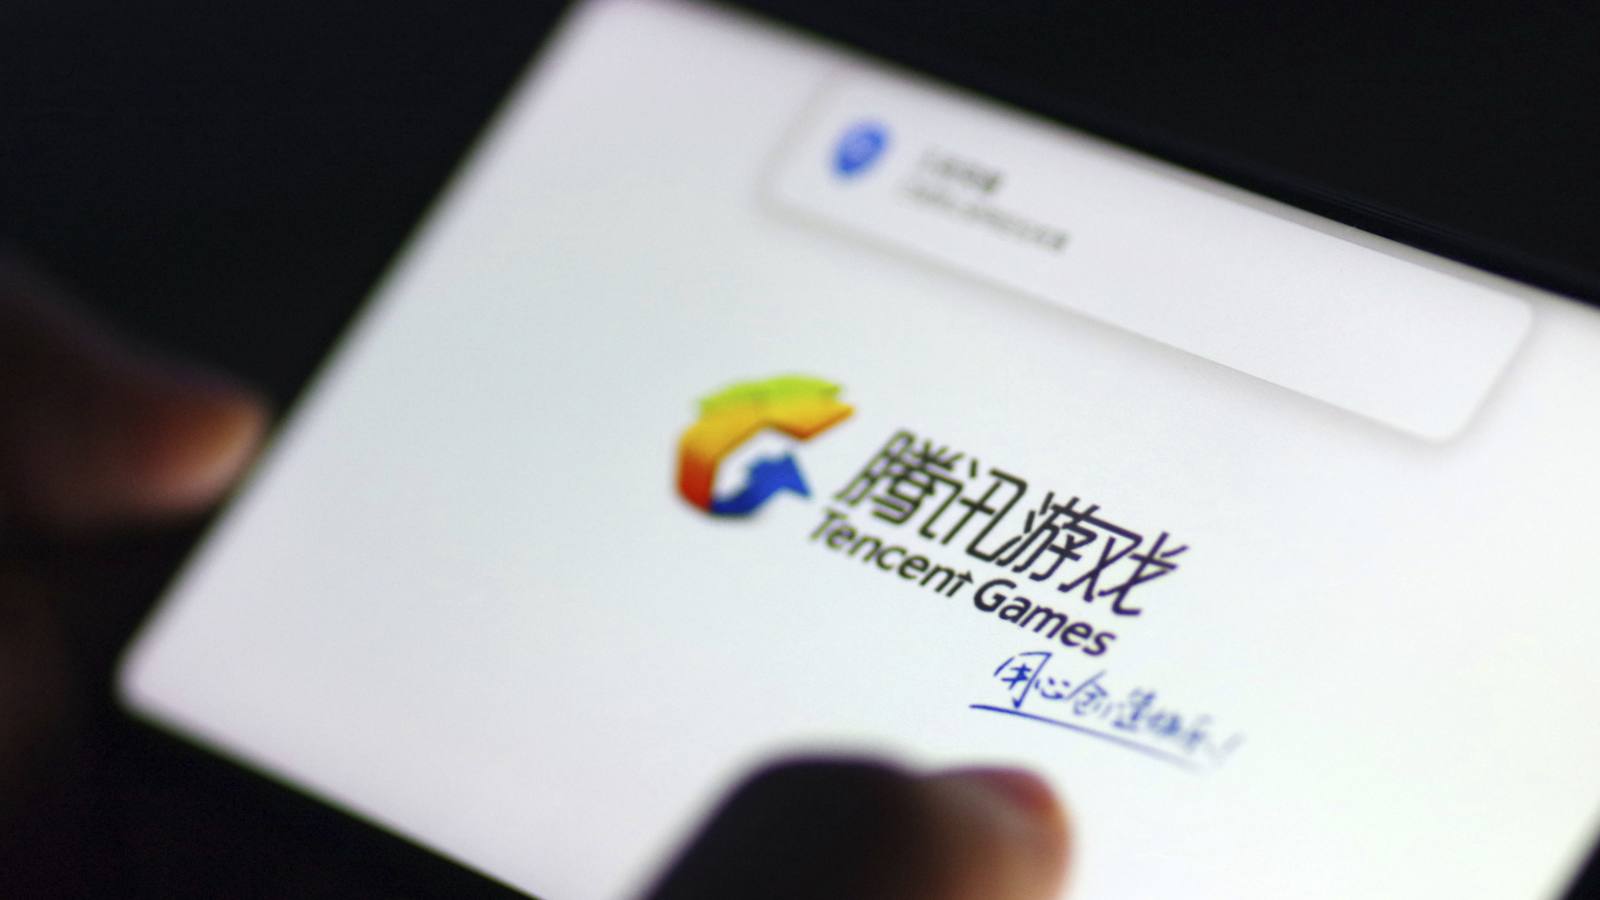 Tencent Games Logo - Chinese carriers dangle game-friendly data plans in price war ...